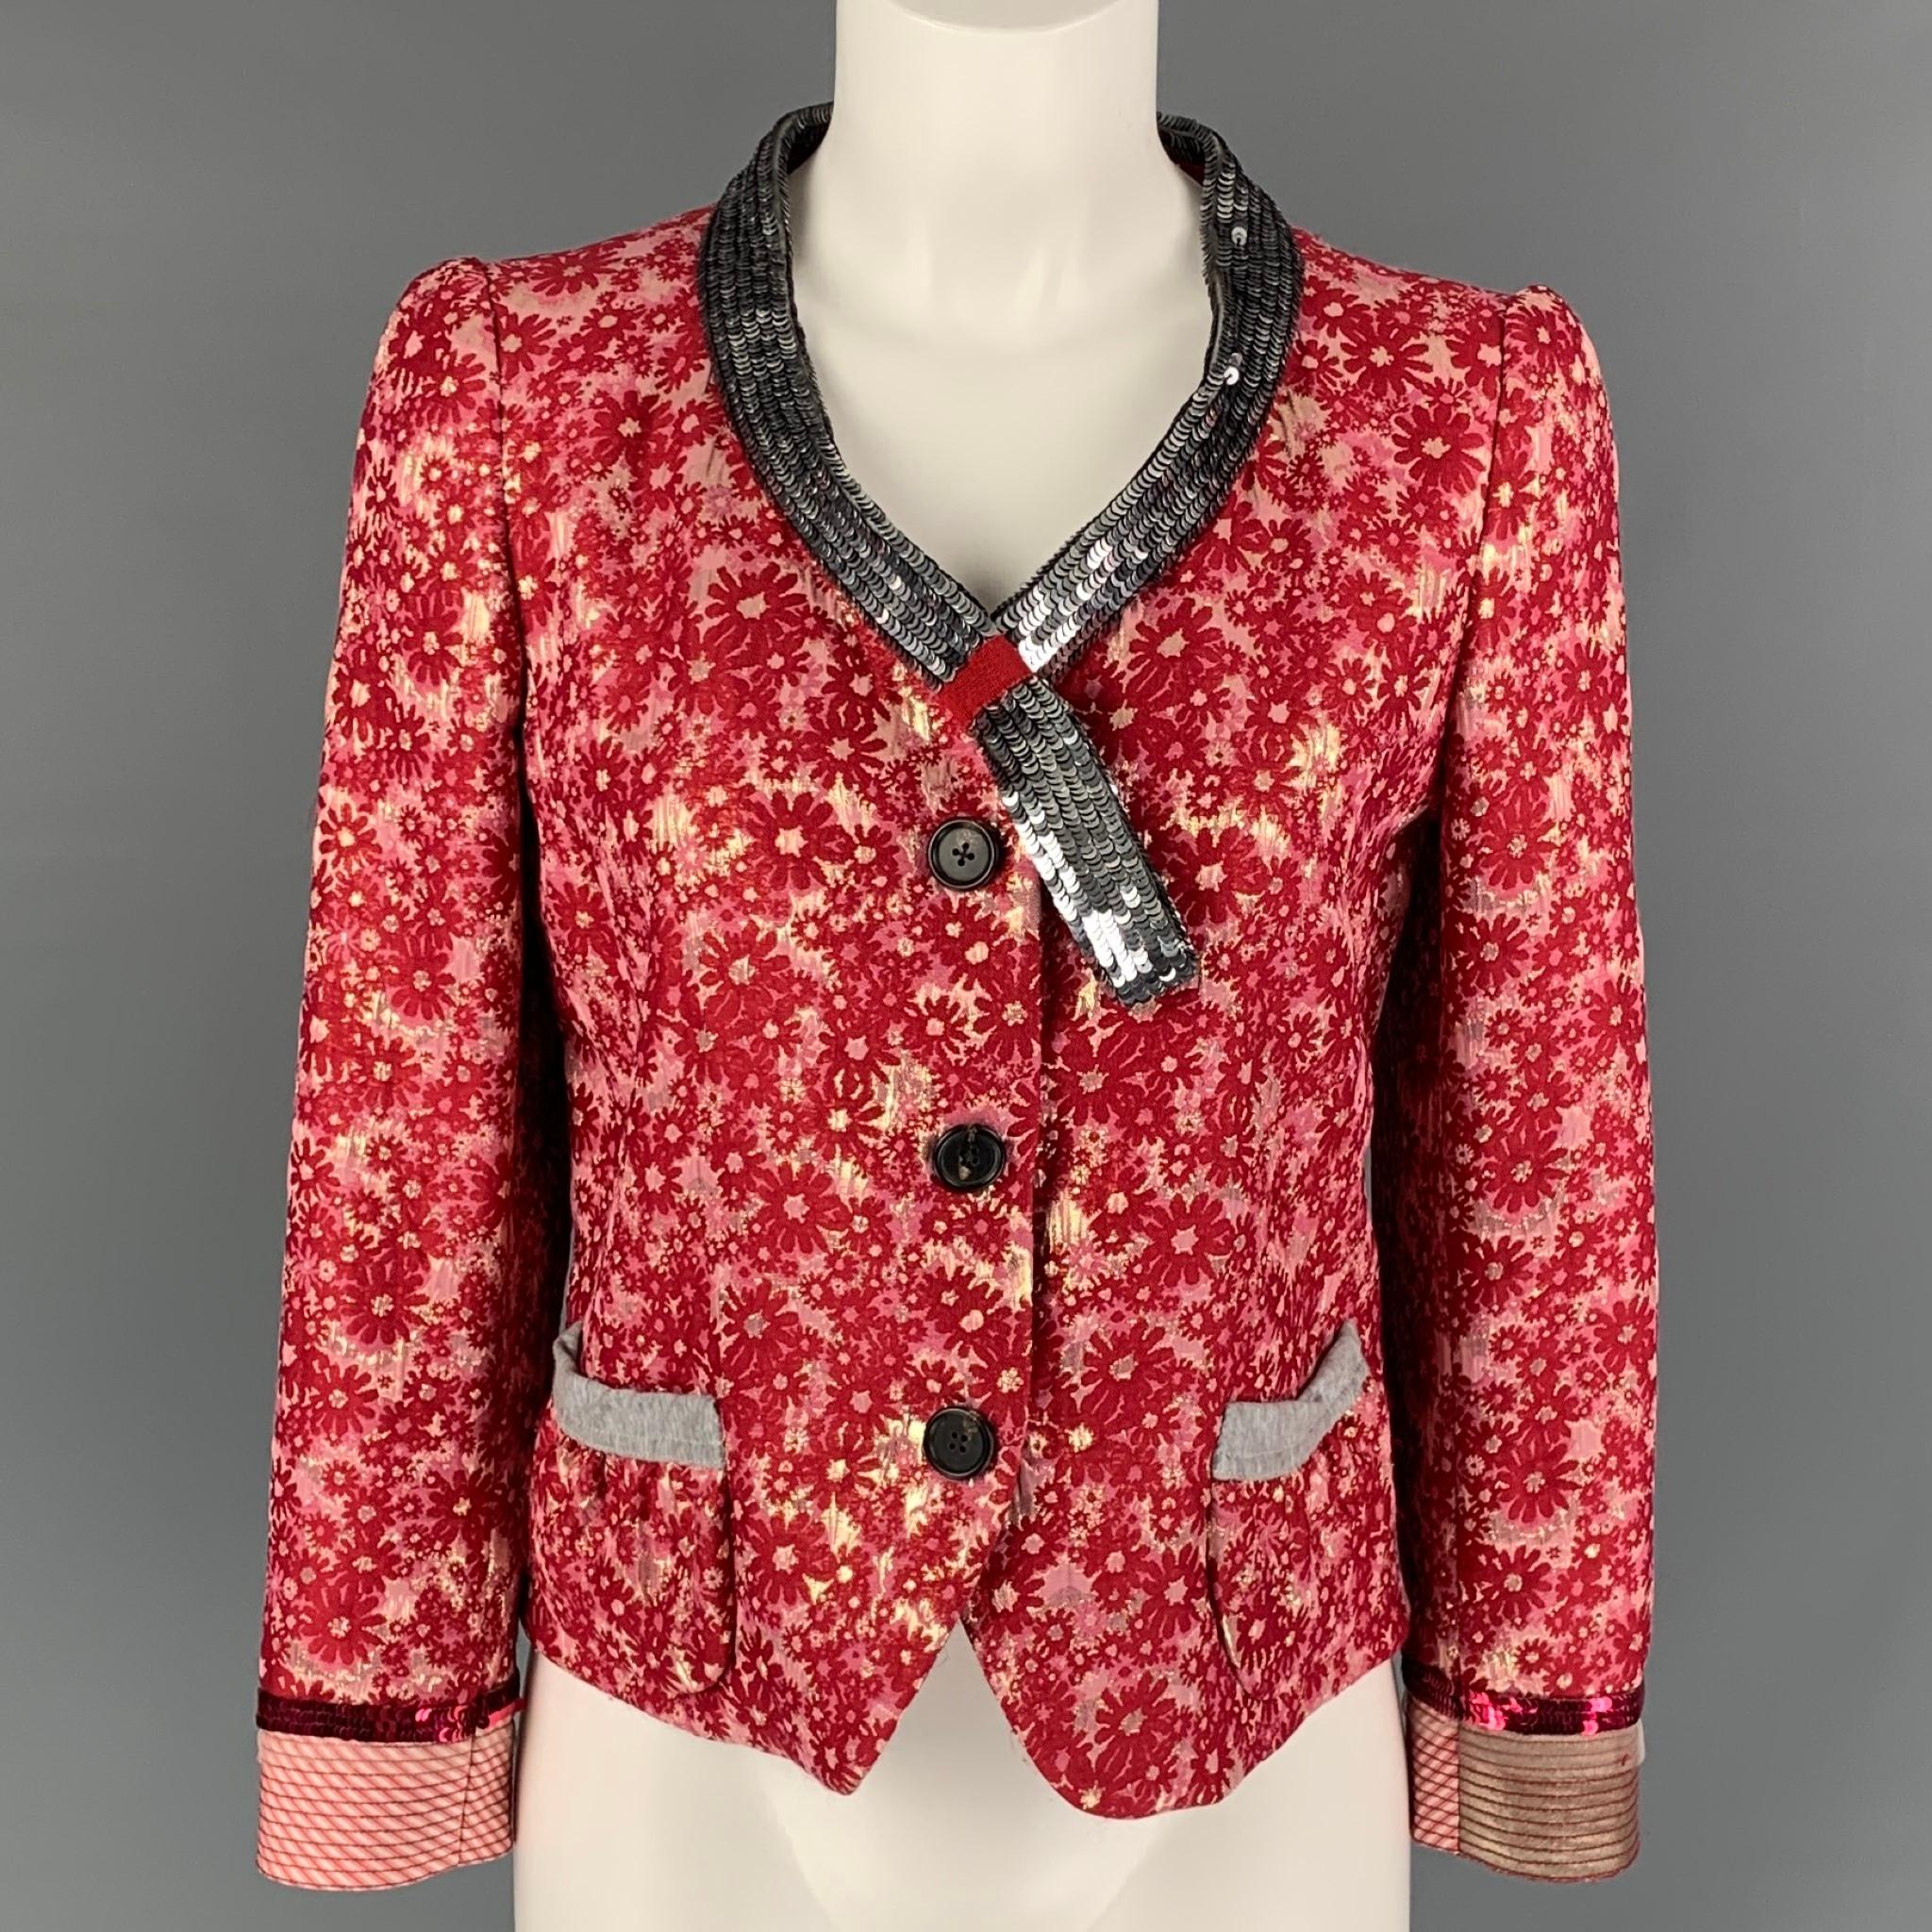 MARC JACOBS blazer comes in raspberry and silver floral acetate blend jacquard featuring sequins trim details, two frontal pockets, and contrast top stitches. Made in USA.

Excellent Pre-Owned Condition.
Marked: 6

Measurements:

Shoulder: 14